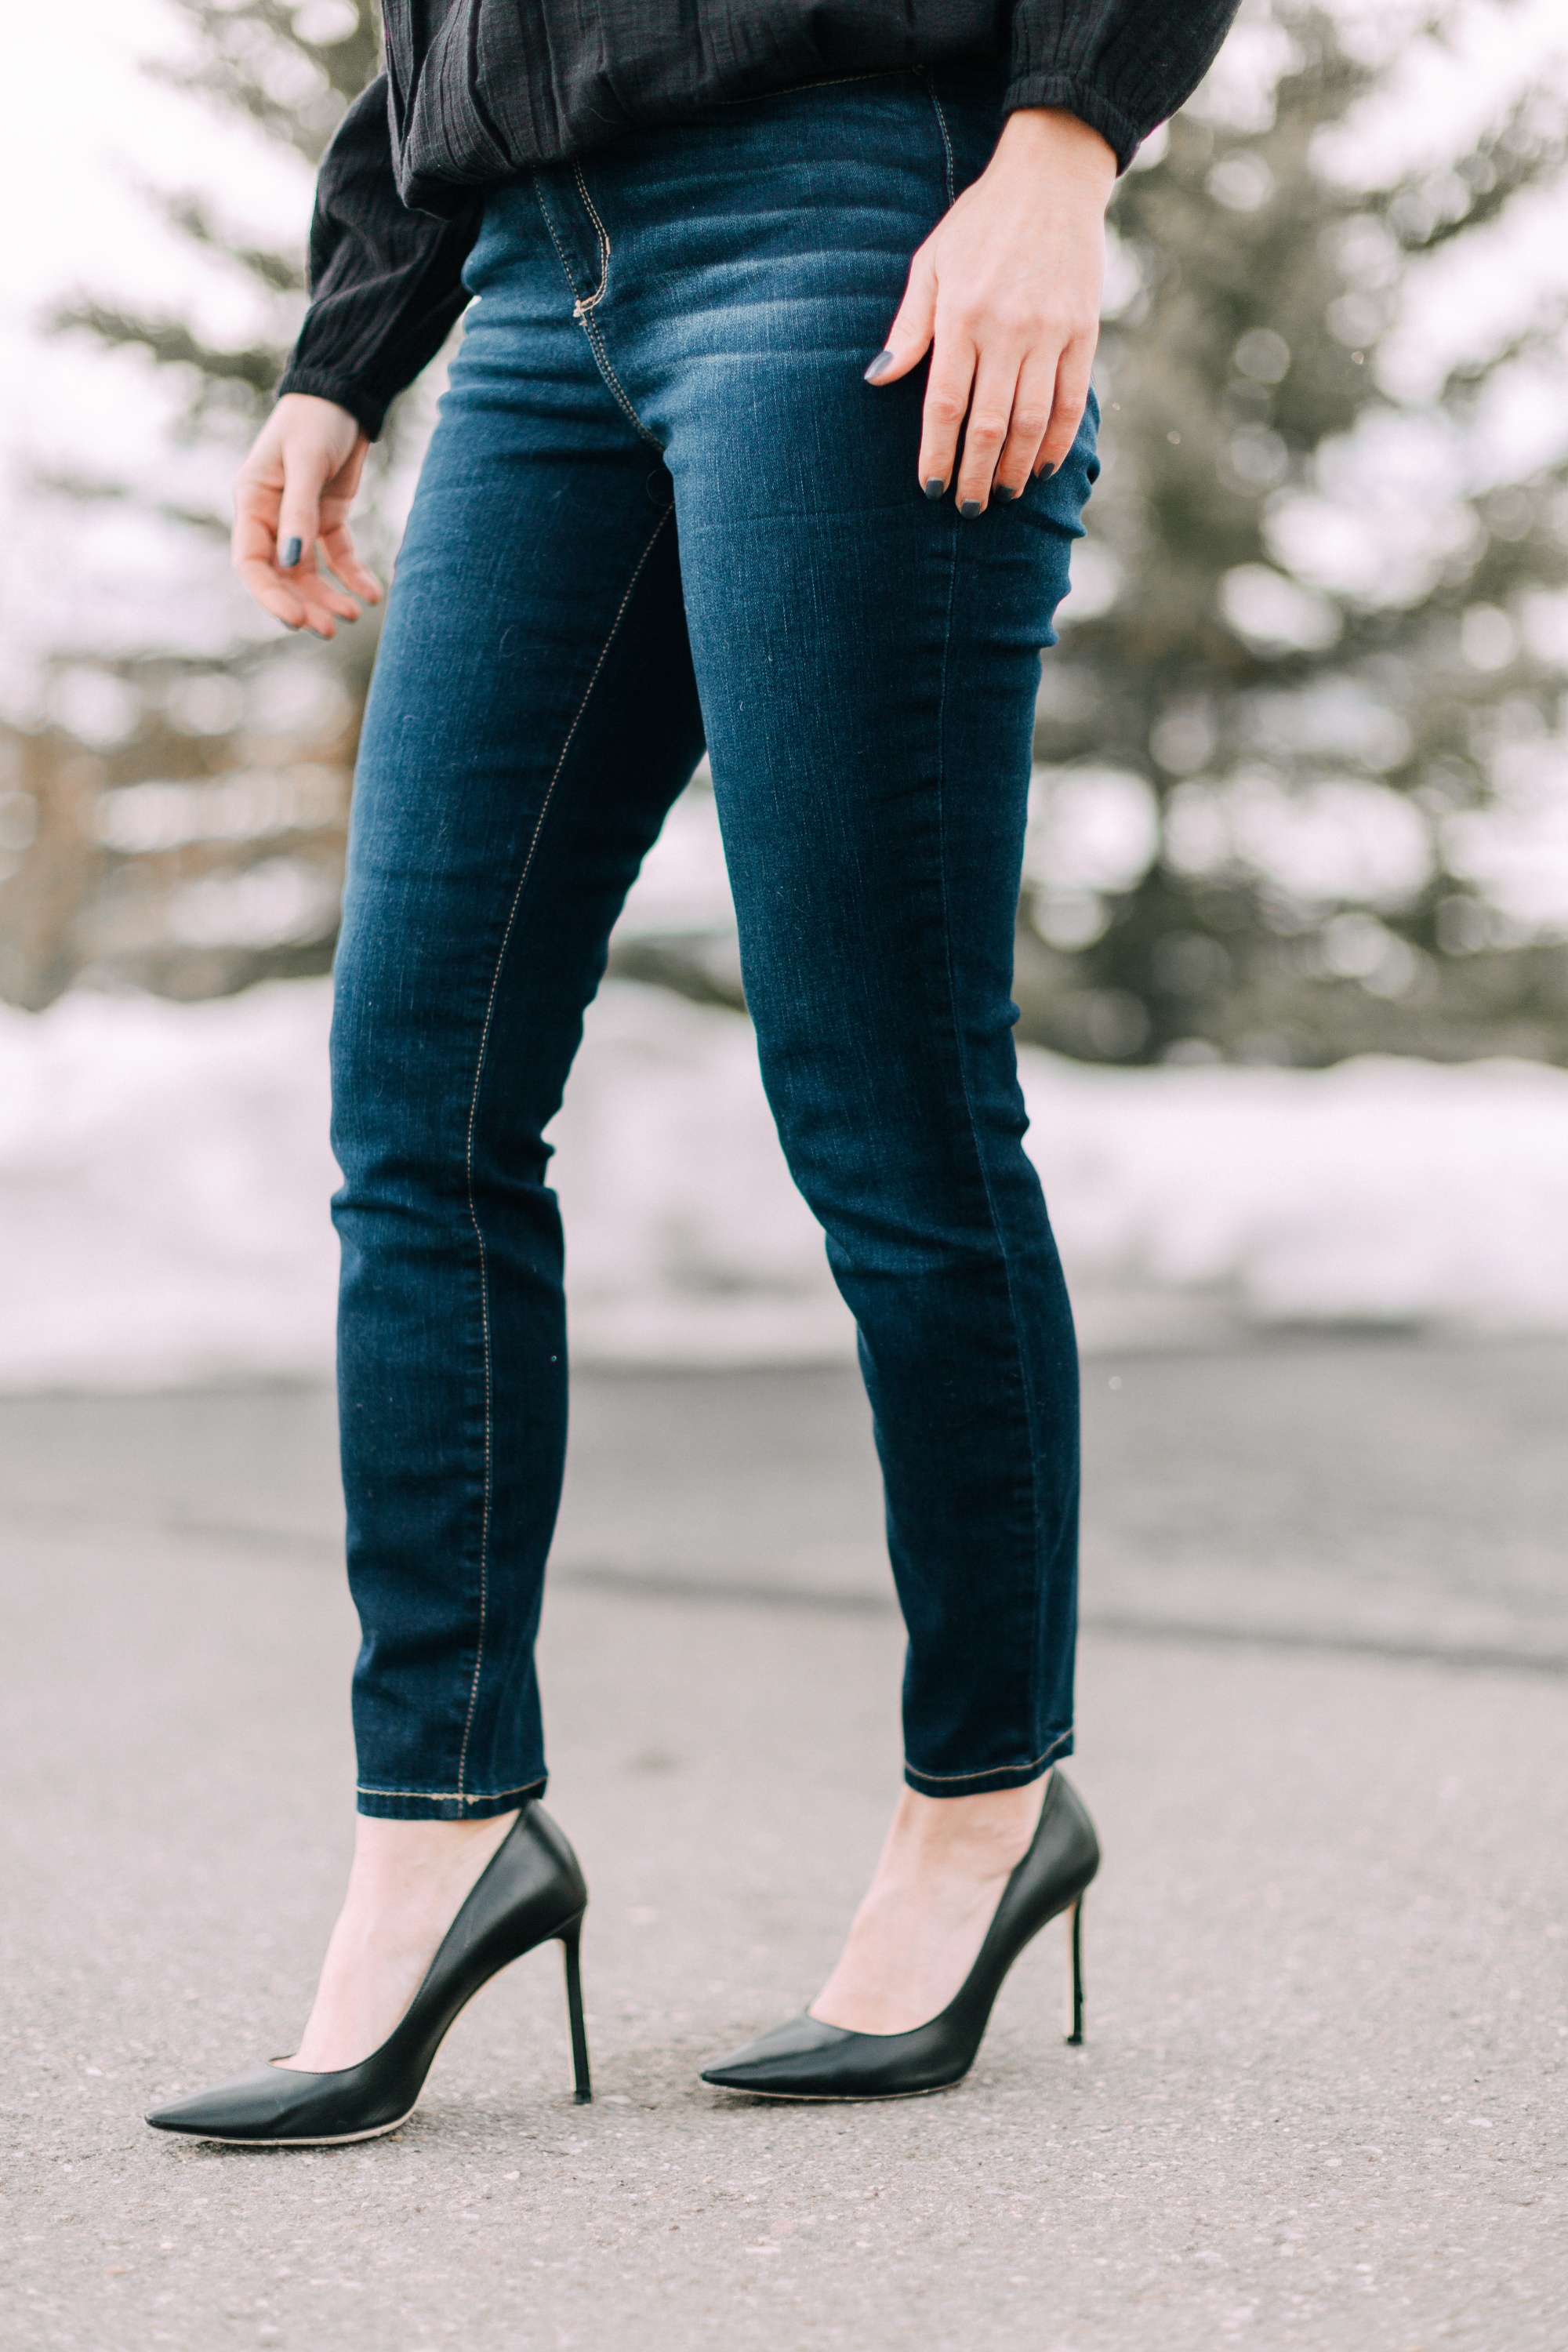 Fashion blogger Erin Busbee wearing dark wash skinny jeans from the new Sofia Vergara line at Walmart with black pumps